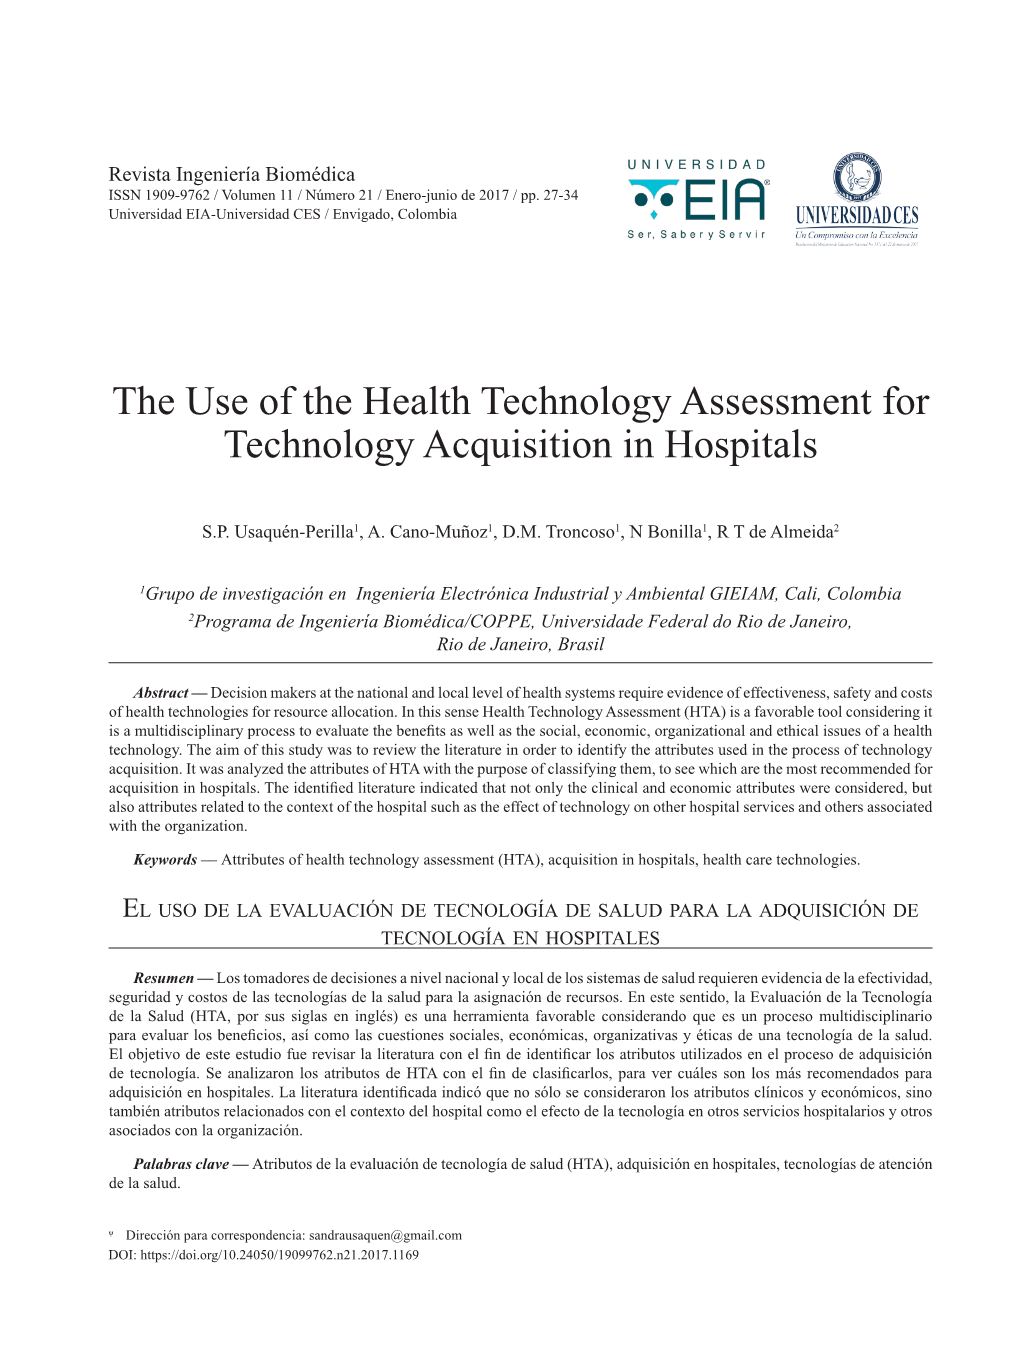 The Use of the Health Technology Assessment for Technology Acquisition in Hospitals